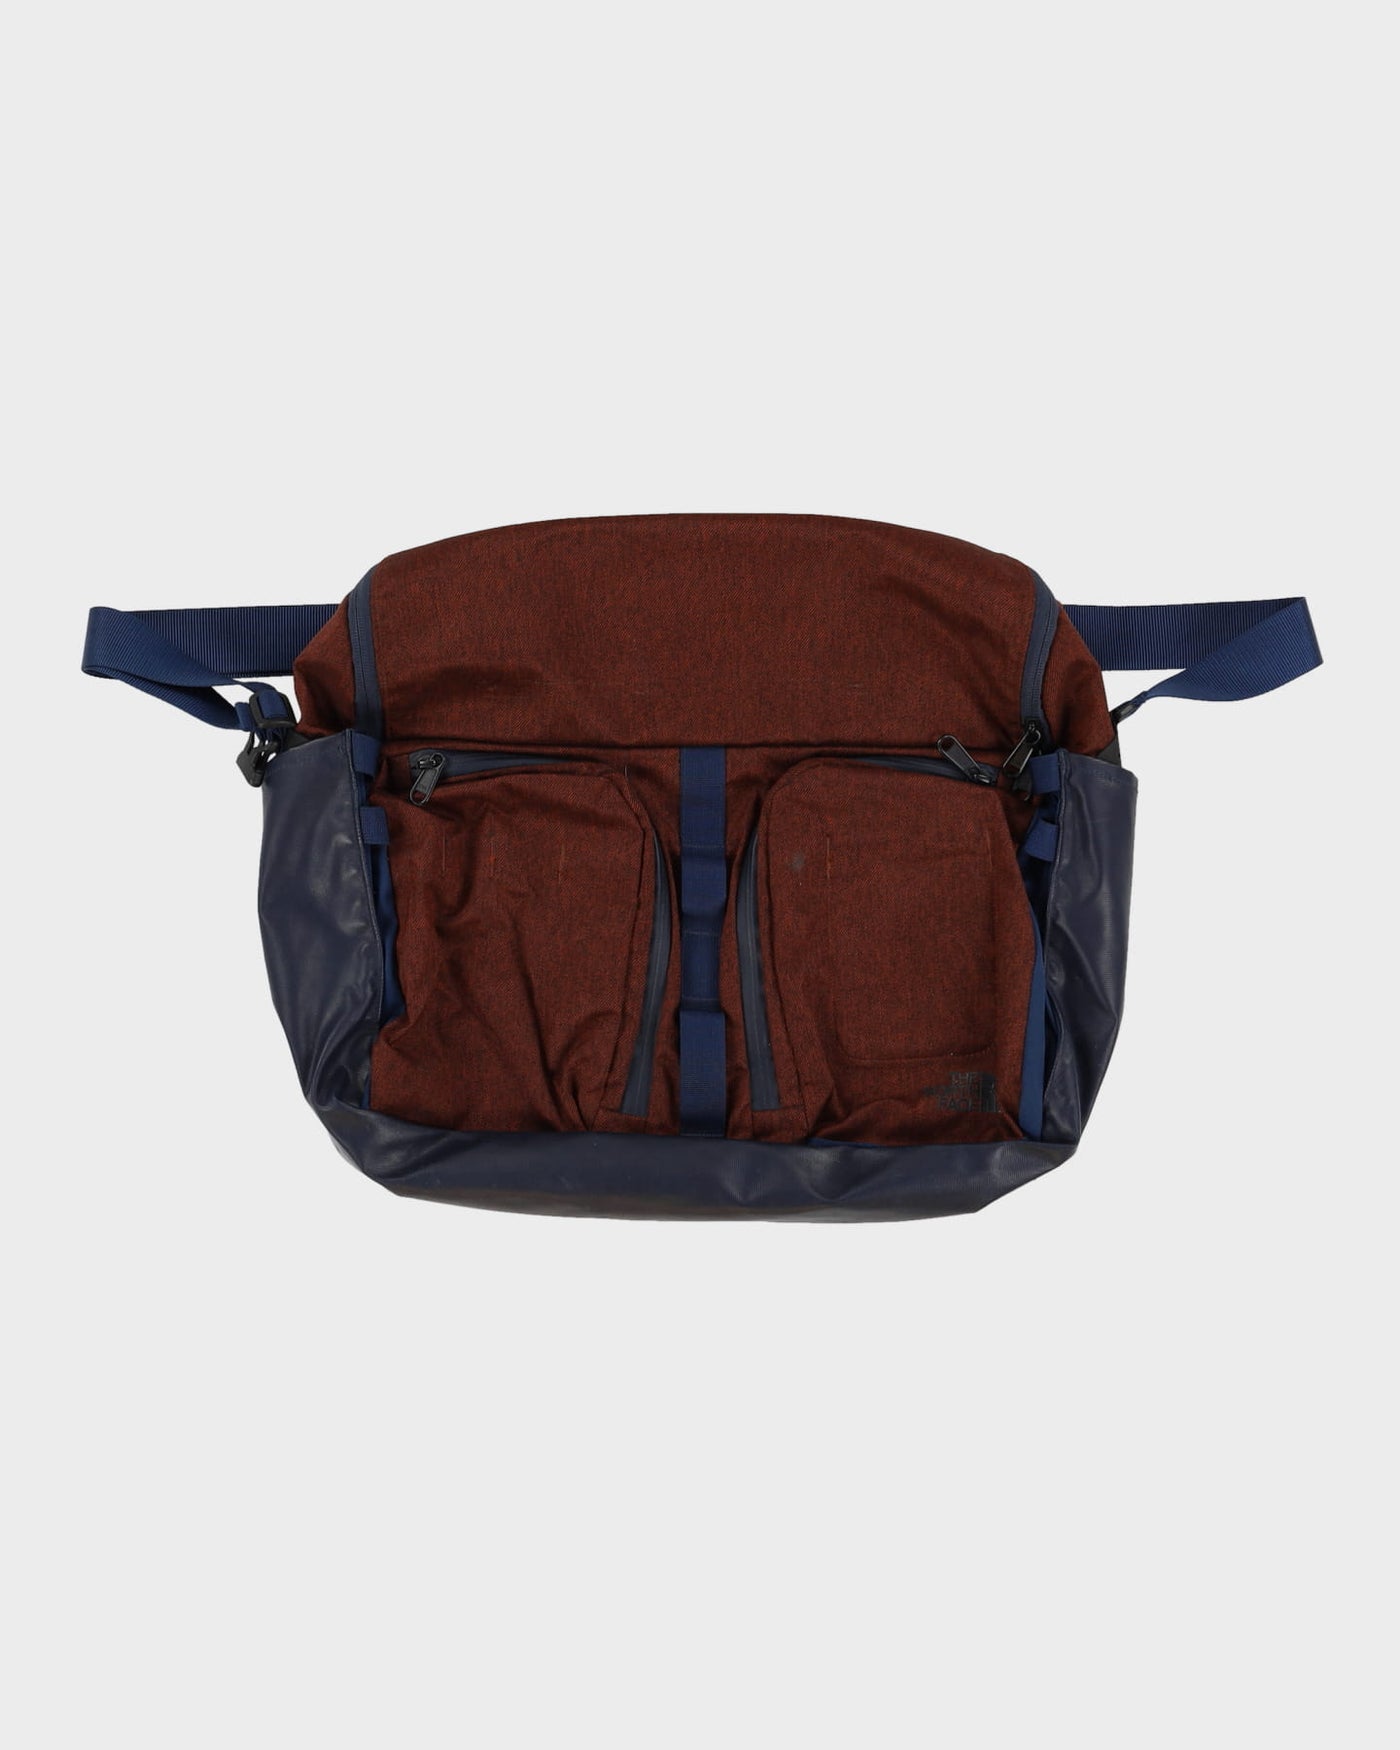 The North Face Navy / Brown Laptop Cross Body Side Bag